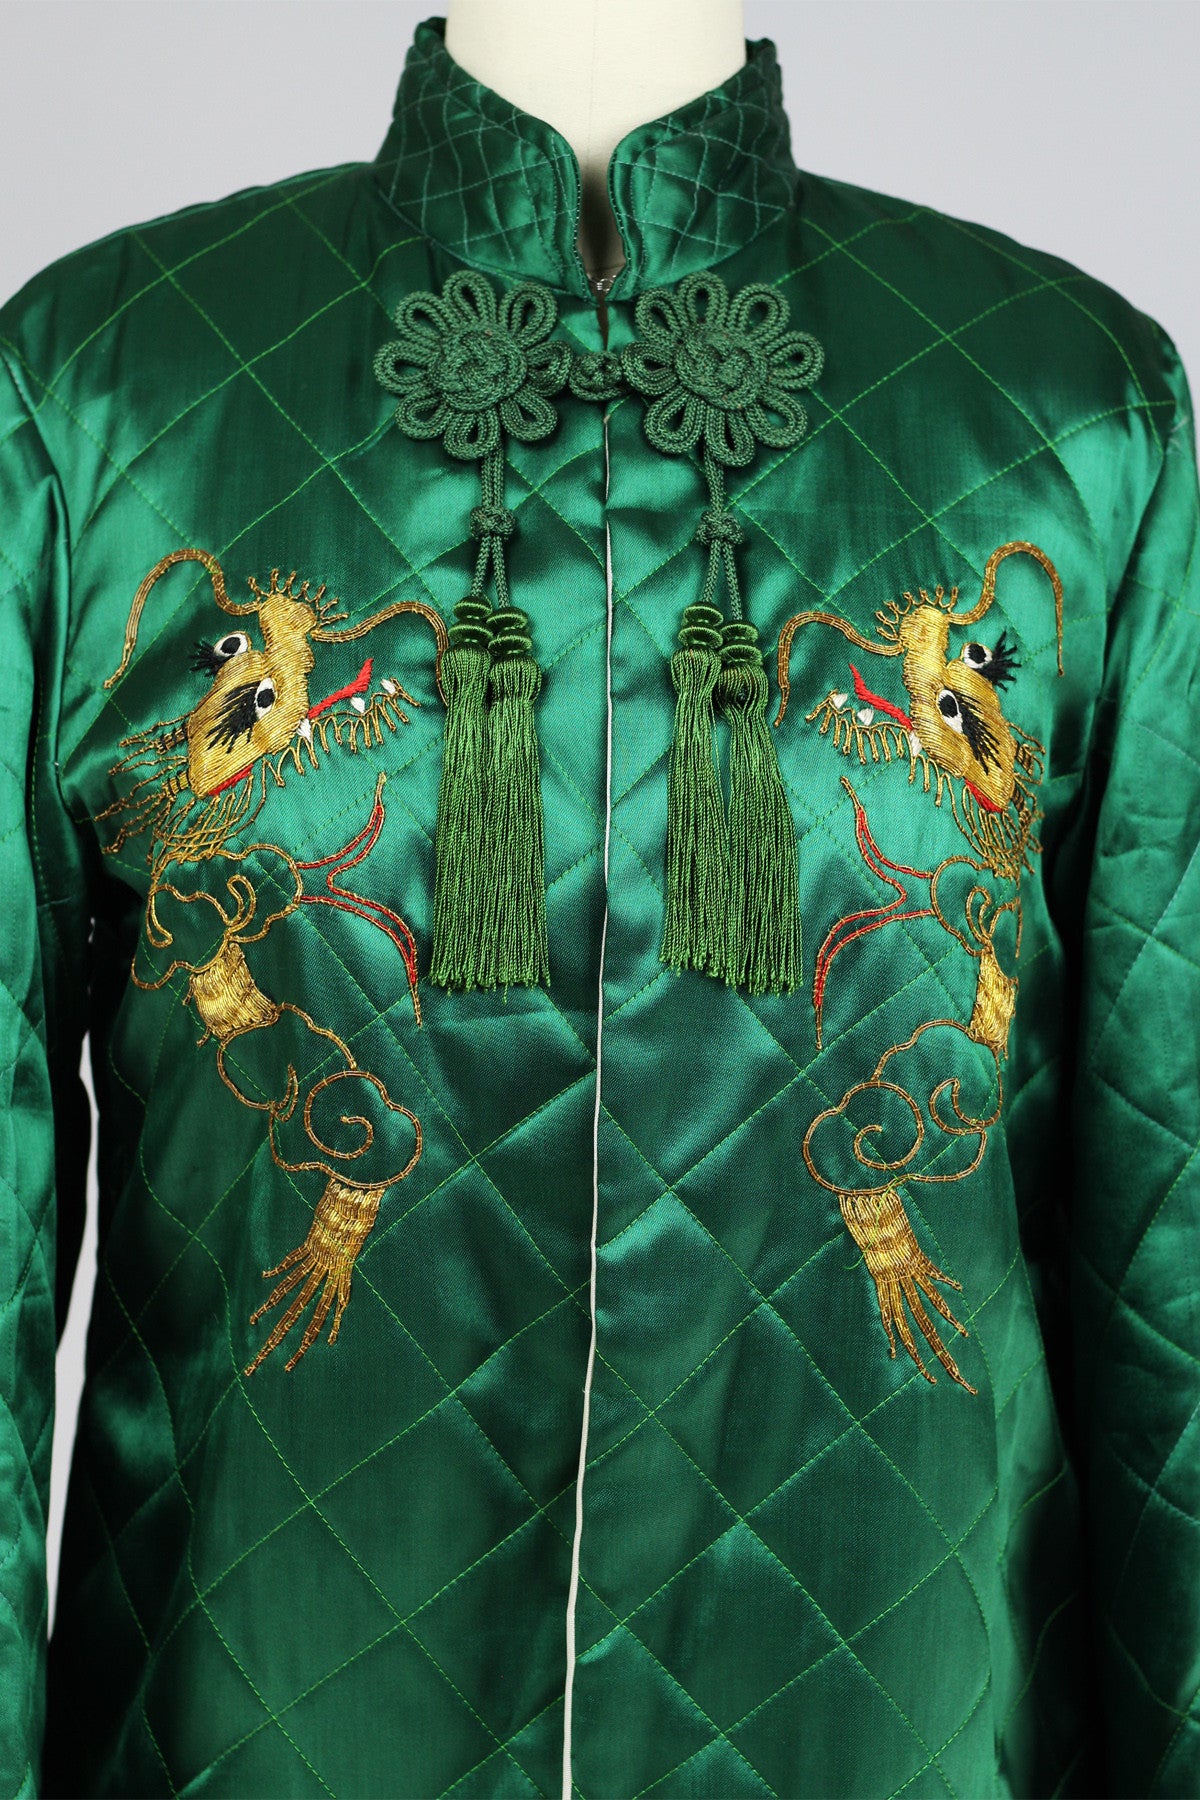 Rare 1940s 50s Vintage Emerald Green Quilted Satin Embroidered Asian Jacket